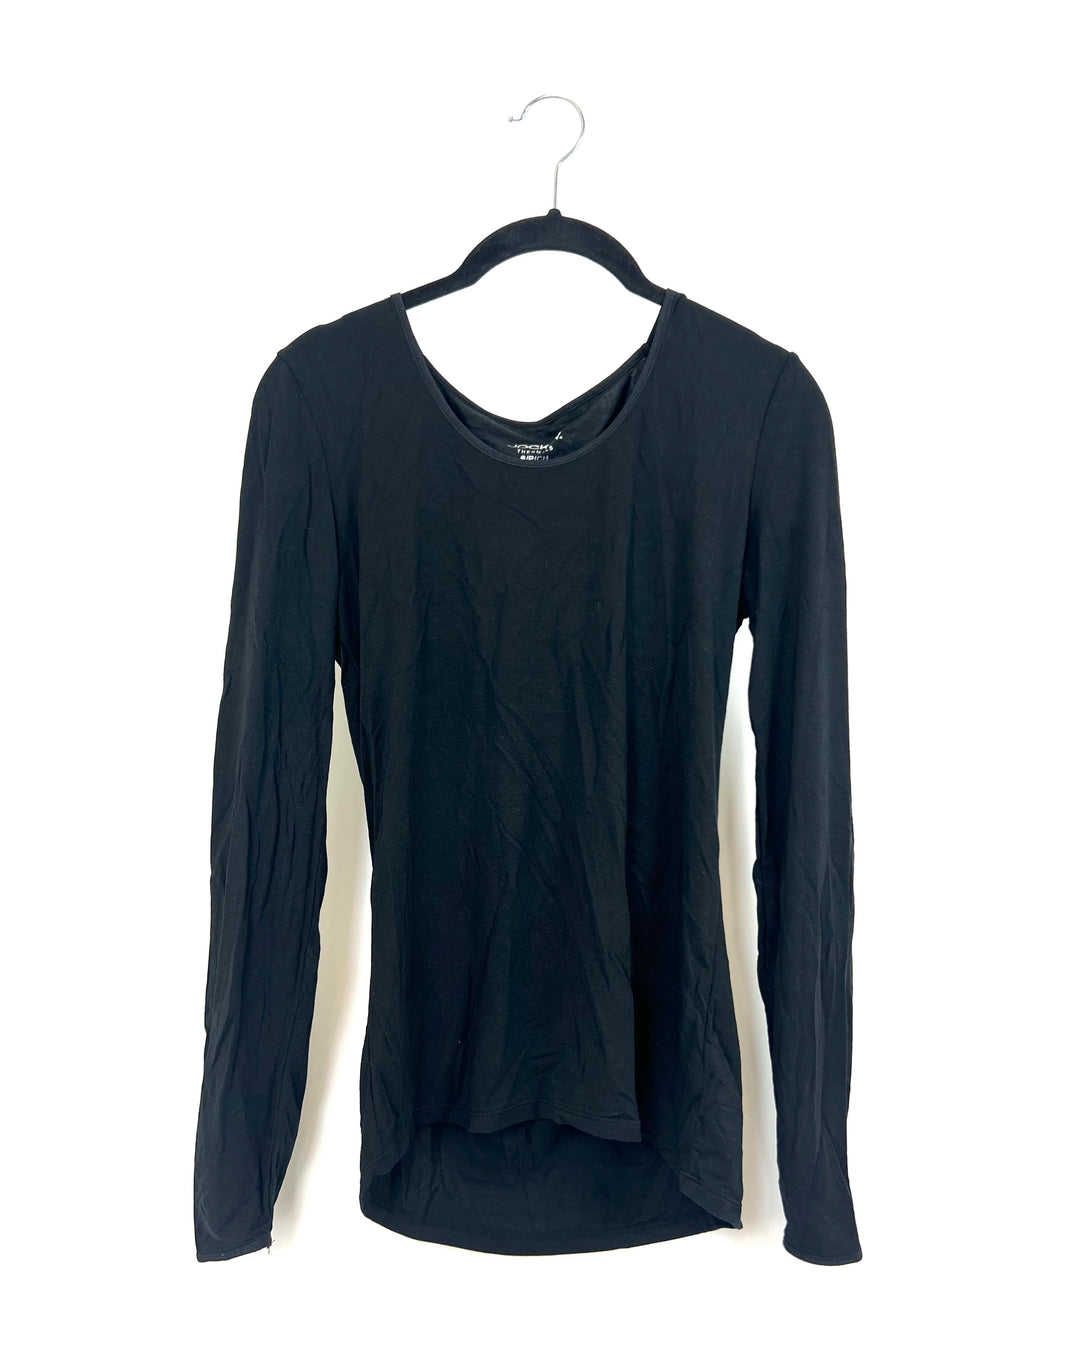 Long Sleeve Fitted Black Top - Small